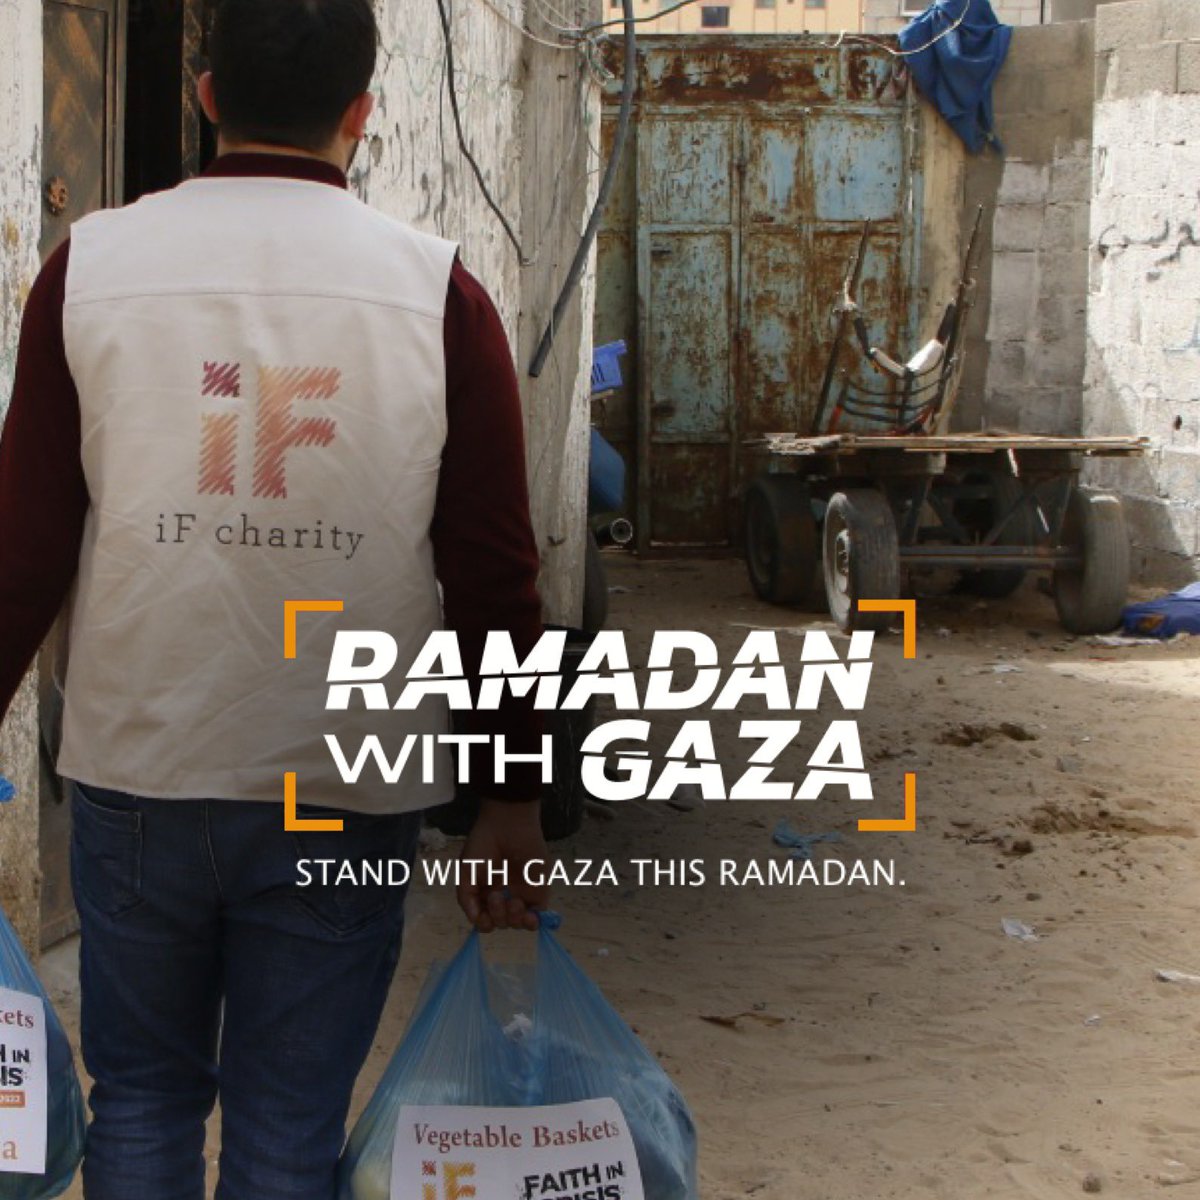 As we enter the blessed month, let's heed the Prophet's words: 'The best charity is the one given in Ramadan.'

Your contribution helps @iFCharityUK make a significant impact on families struggling for their basic needs. 🌙

muslimgiving.org/RamadanWithGaza
#RamadanForGaza #StandWithGaza